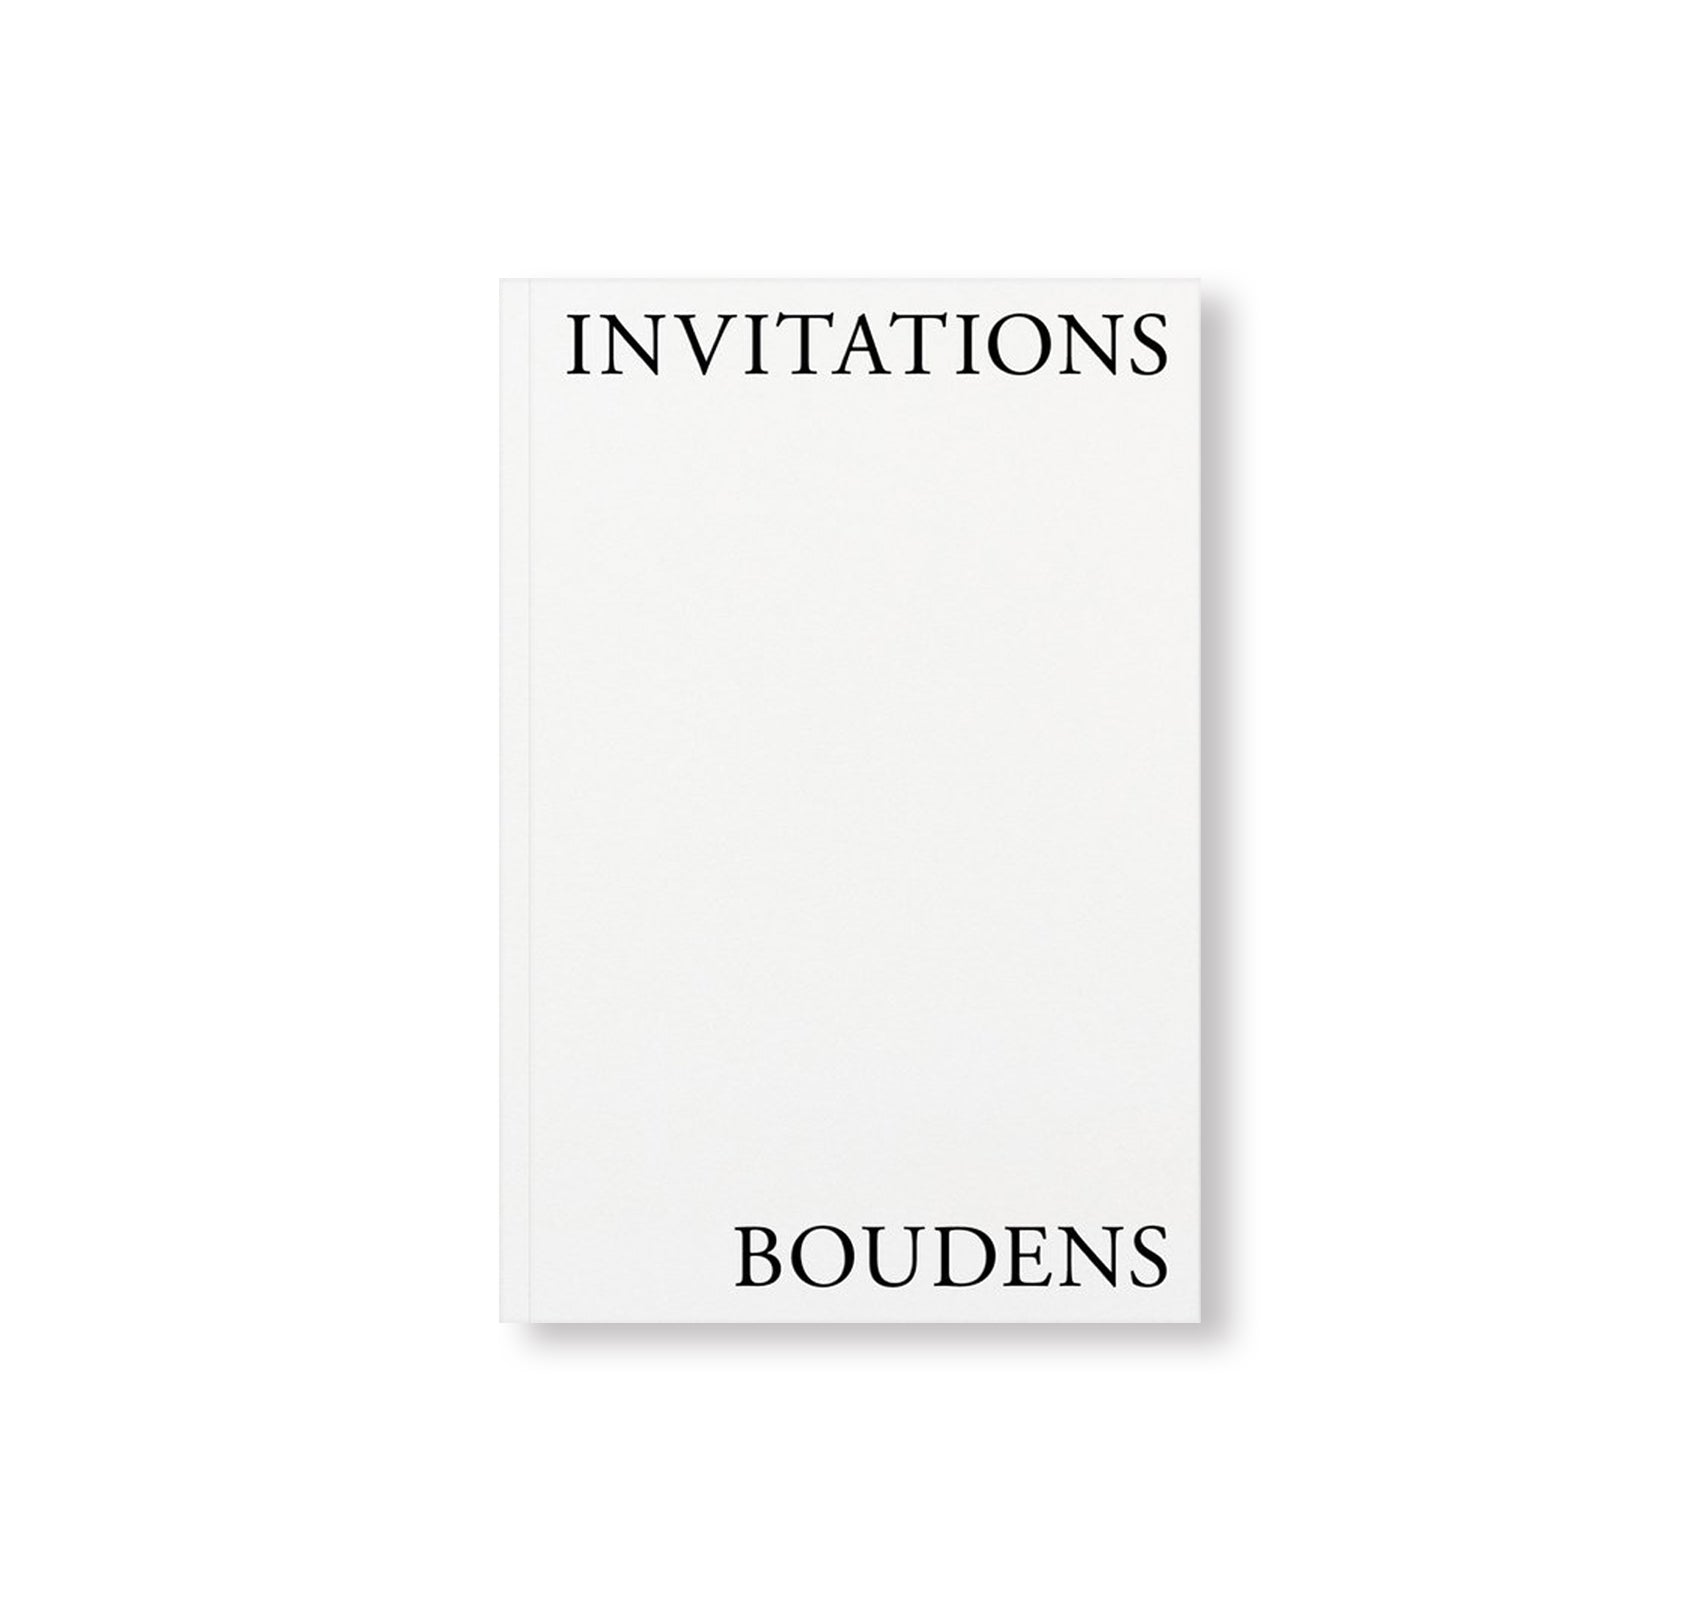 INVITATIONS by Paul Boudens